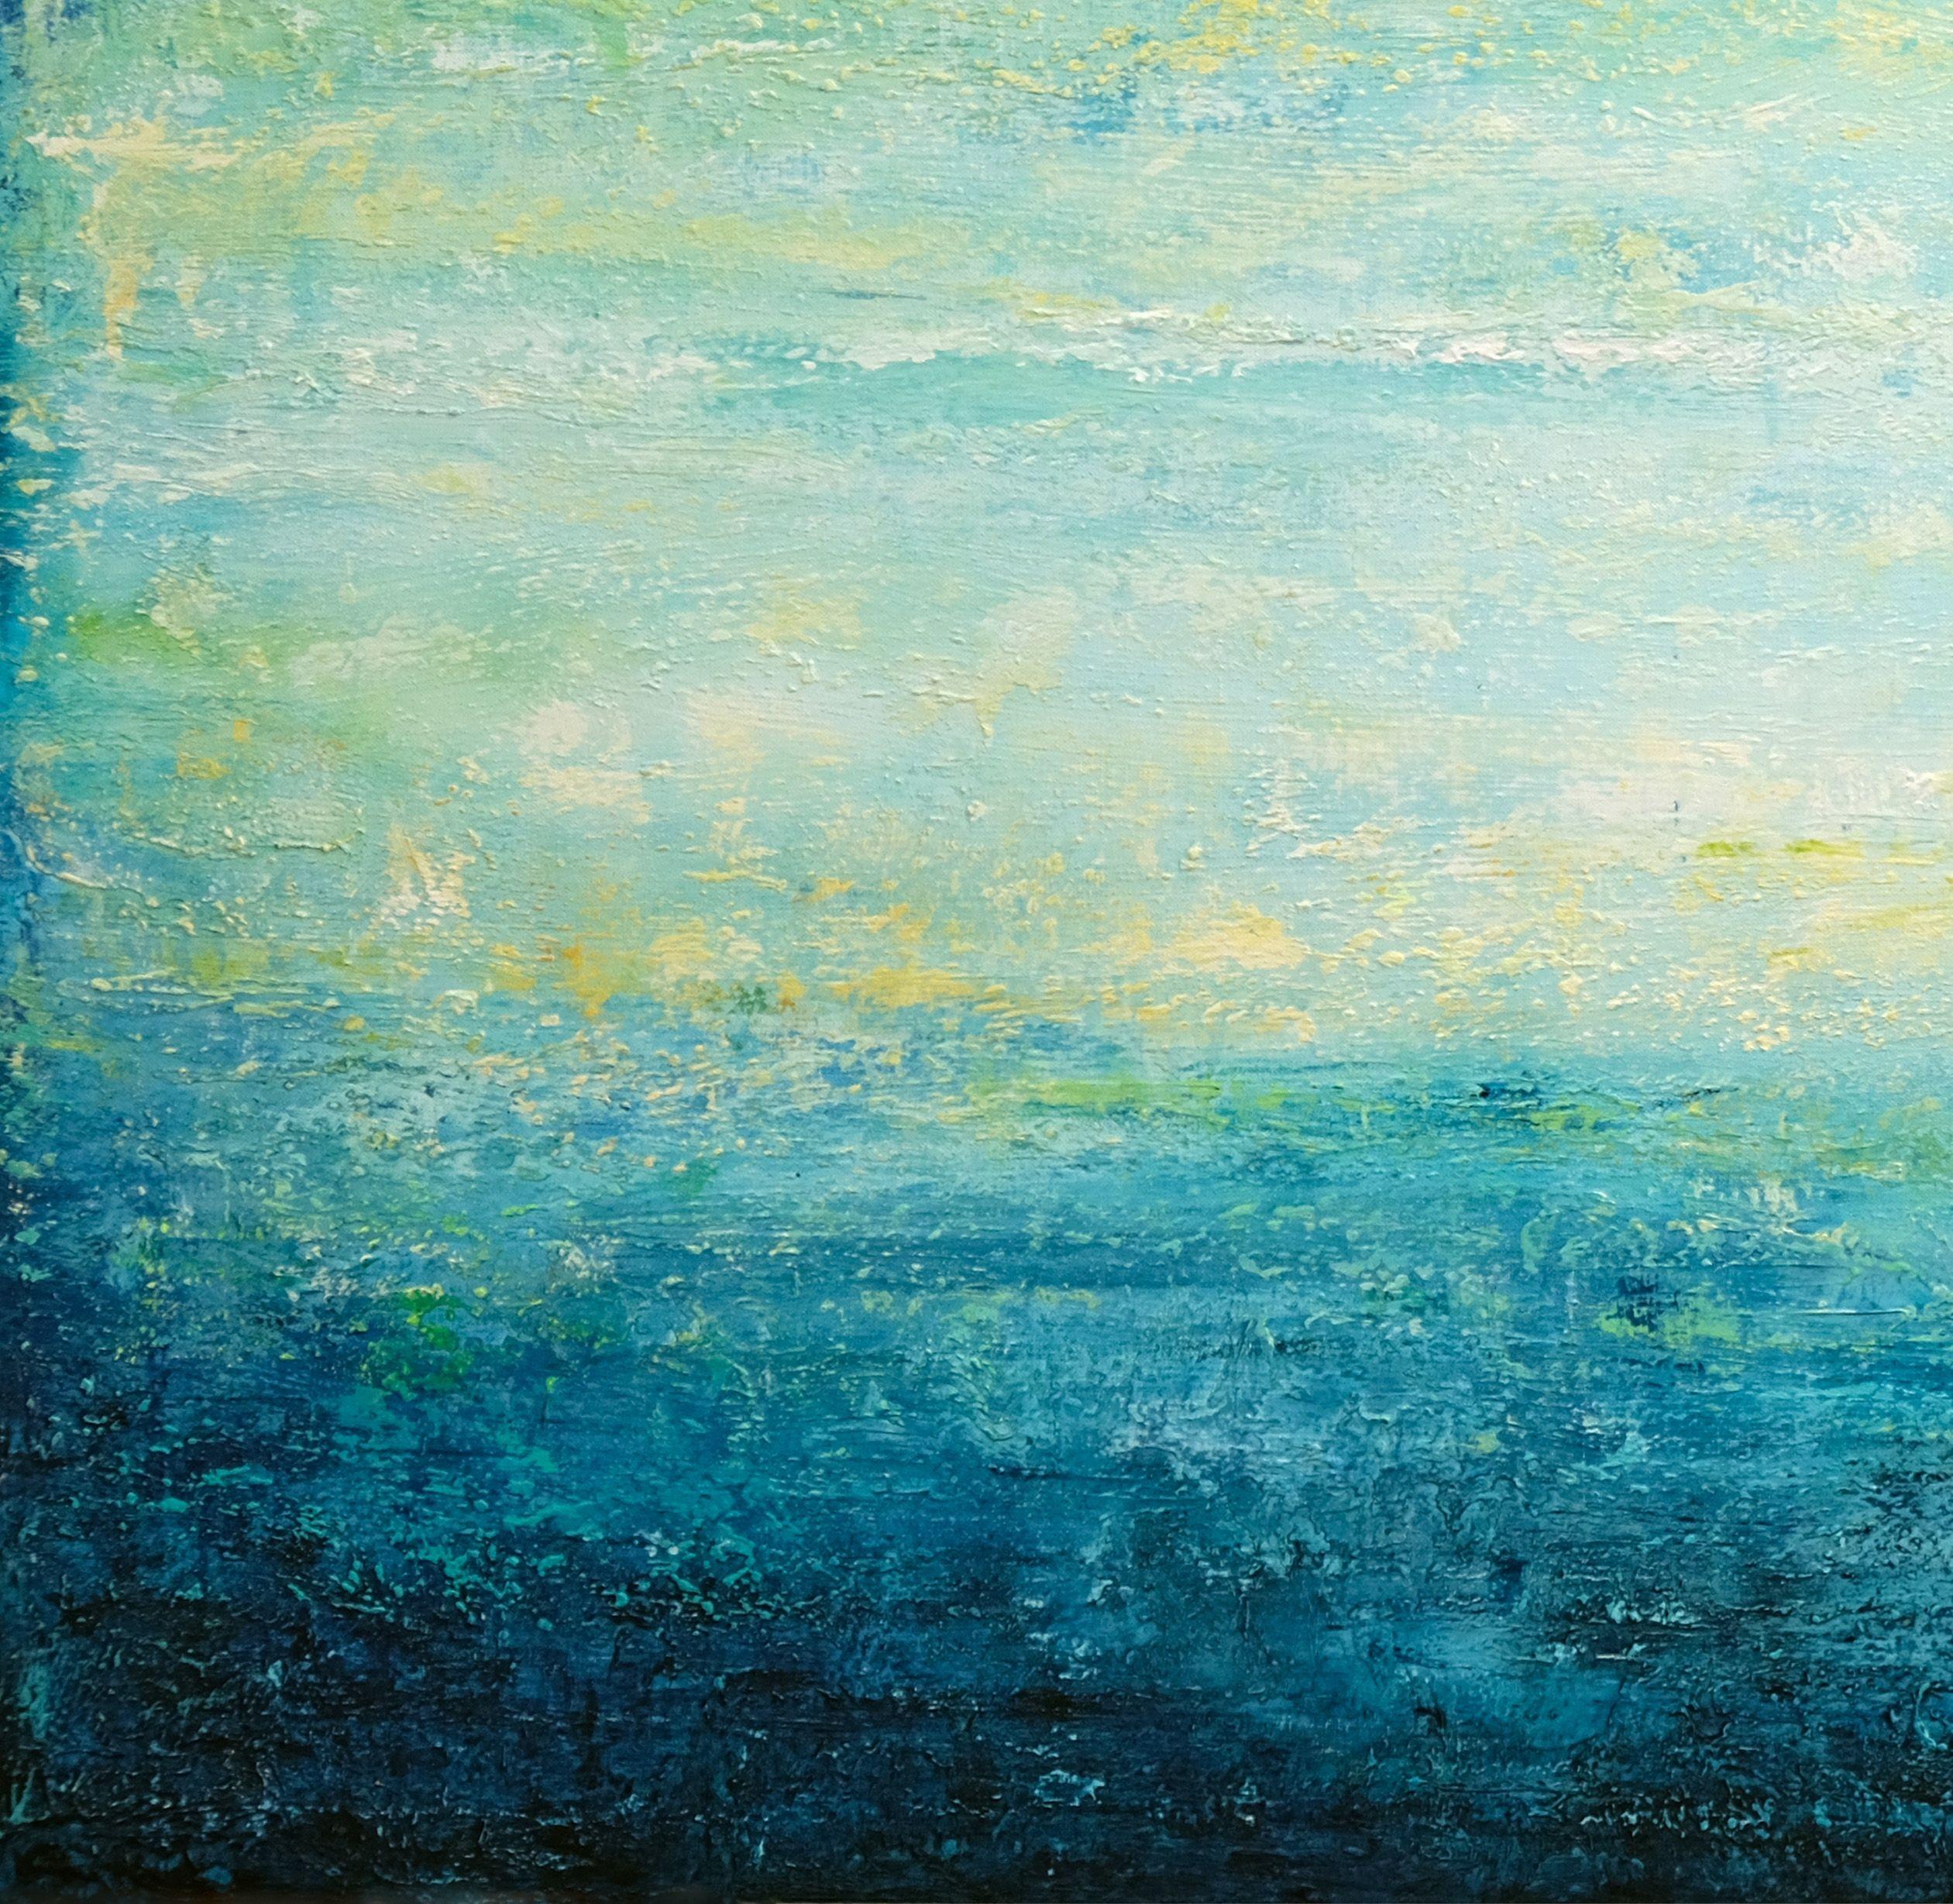 Turquoise Dreamscape V, COMMISSION, Acrylic on Canvas - Blue Abstract Painting by Behshad Arjomandi